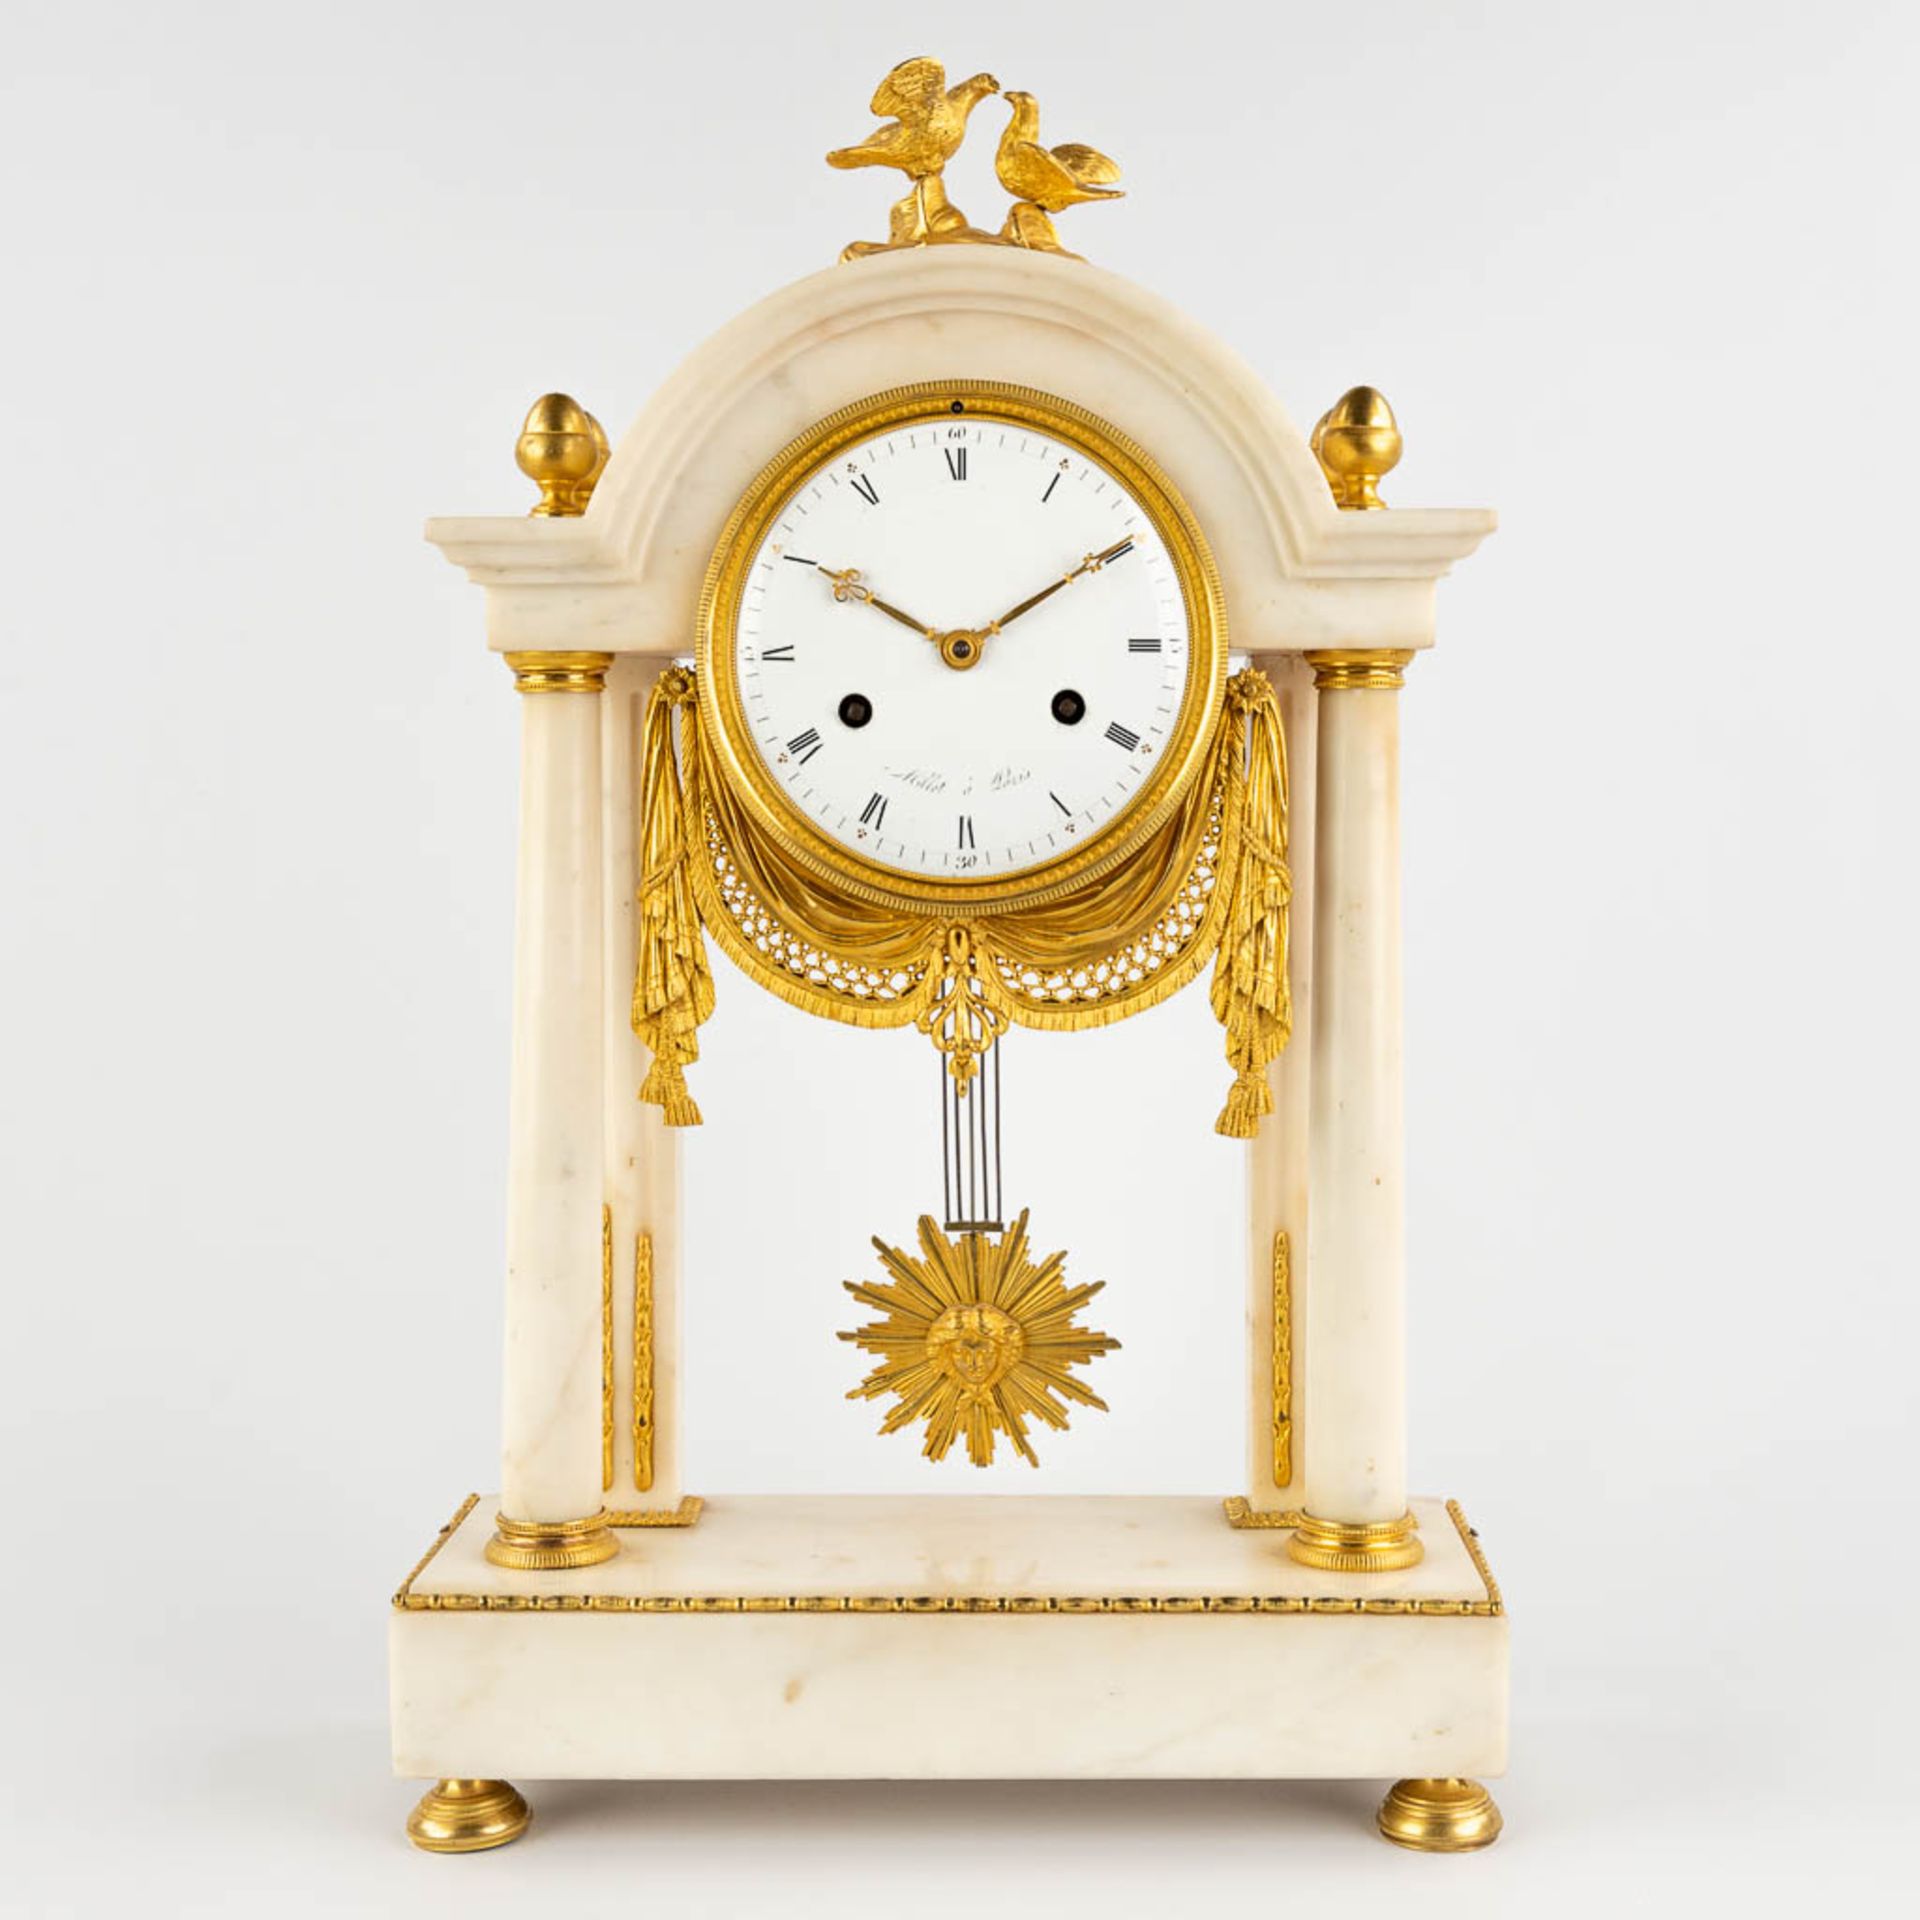 An antique column clock, gilt bronze and white marble. First half of the 19th C. (D:11 x W:28,5 x H: